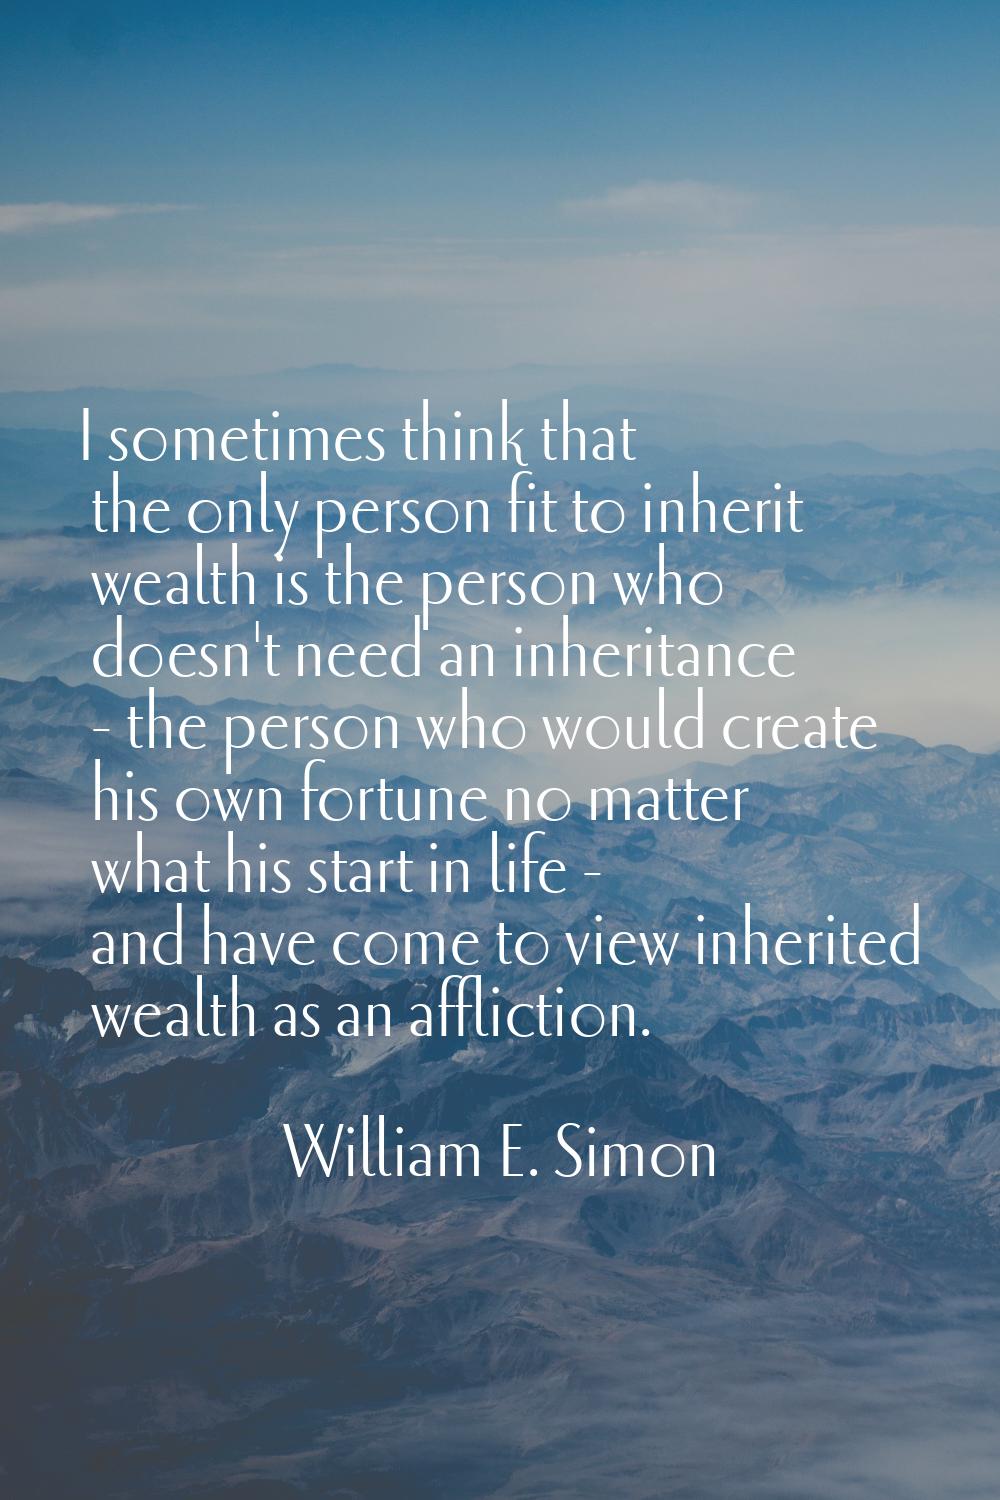 I sometimes think that the only person fit to inherit wealth is the person who doesn't need an inhe